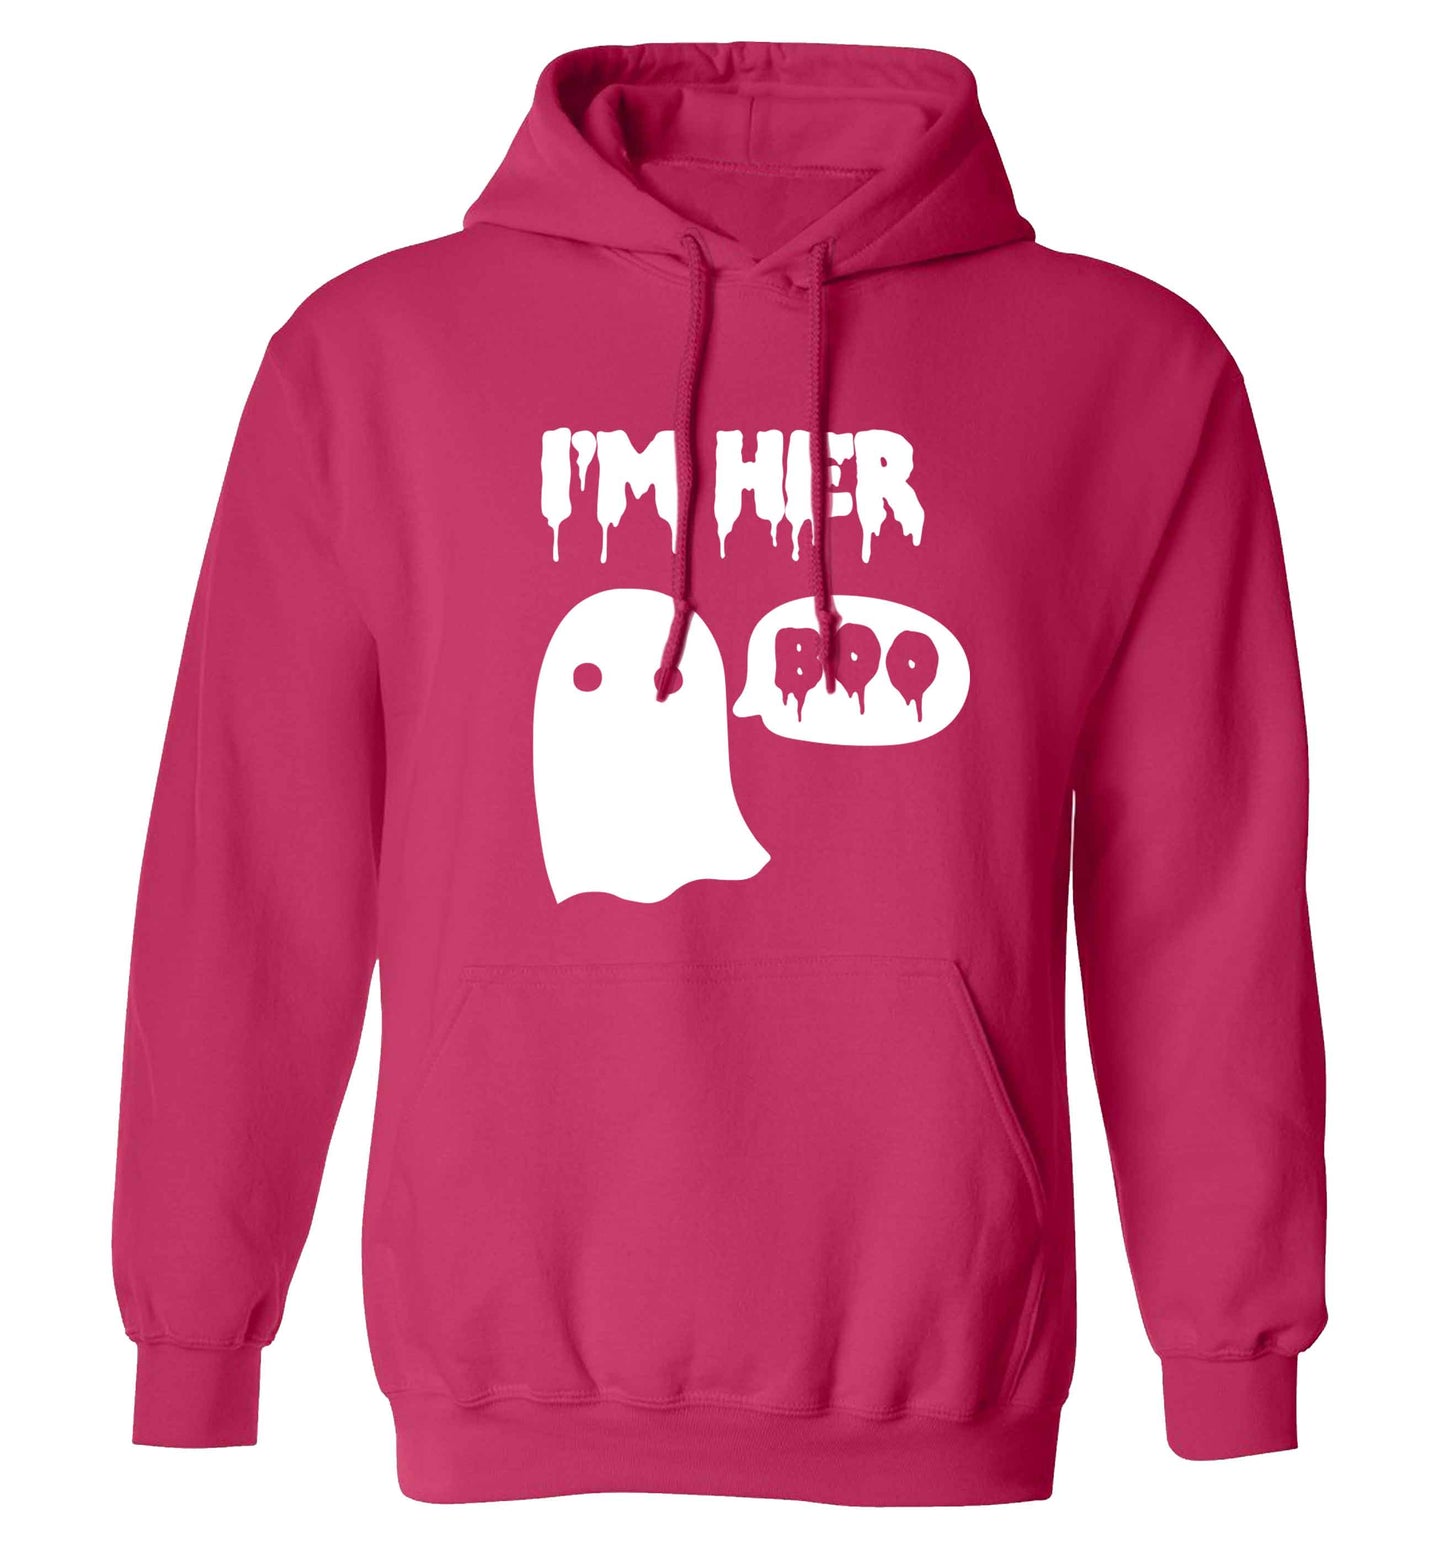 I'm her boo adults unisex pink hoodie 2XL